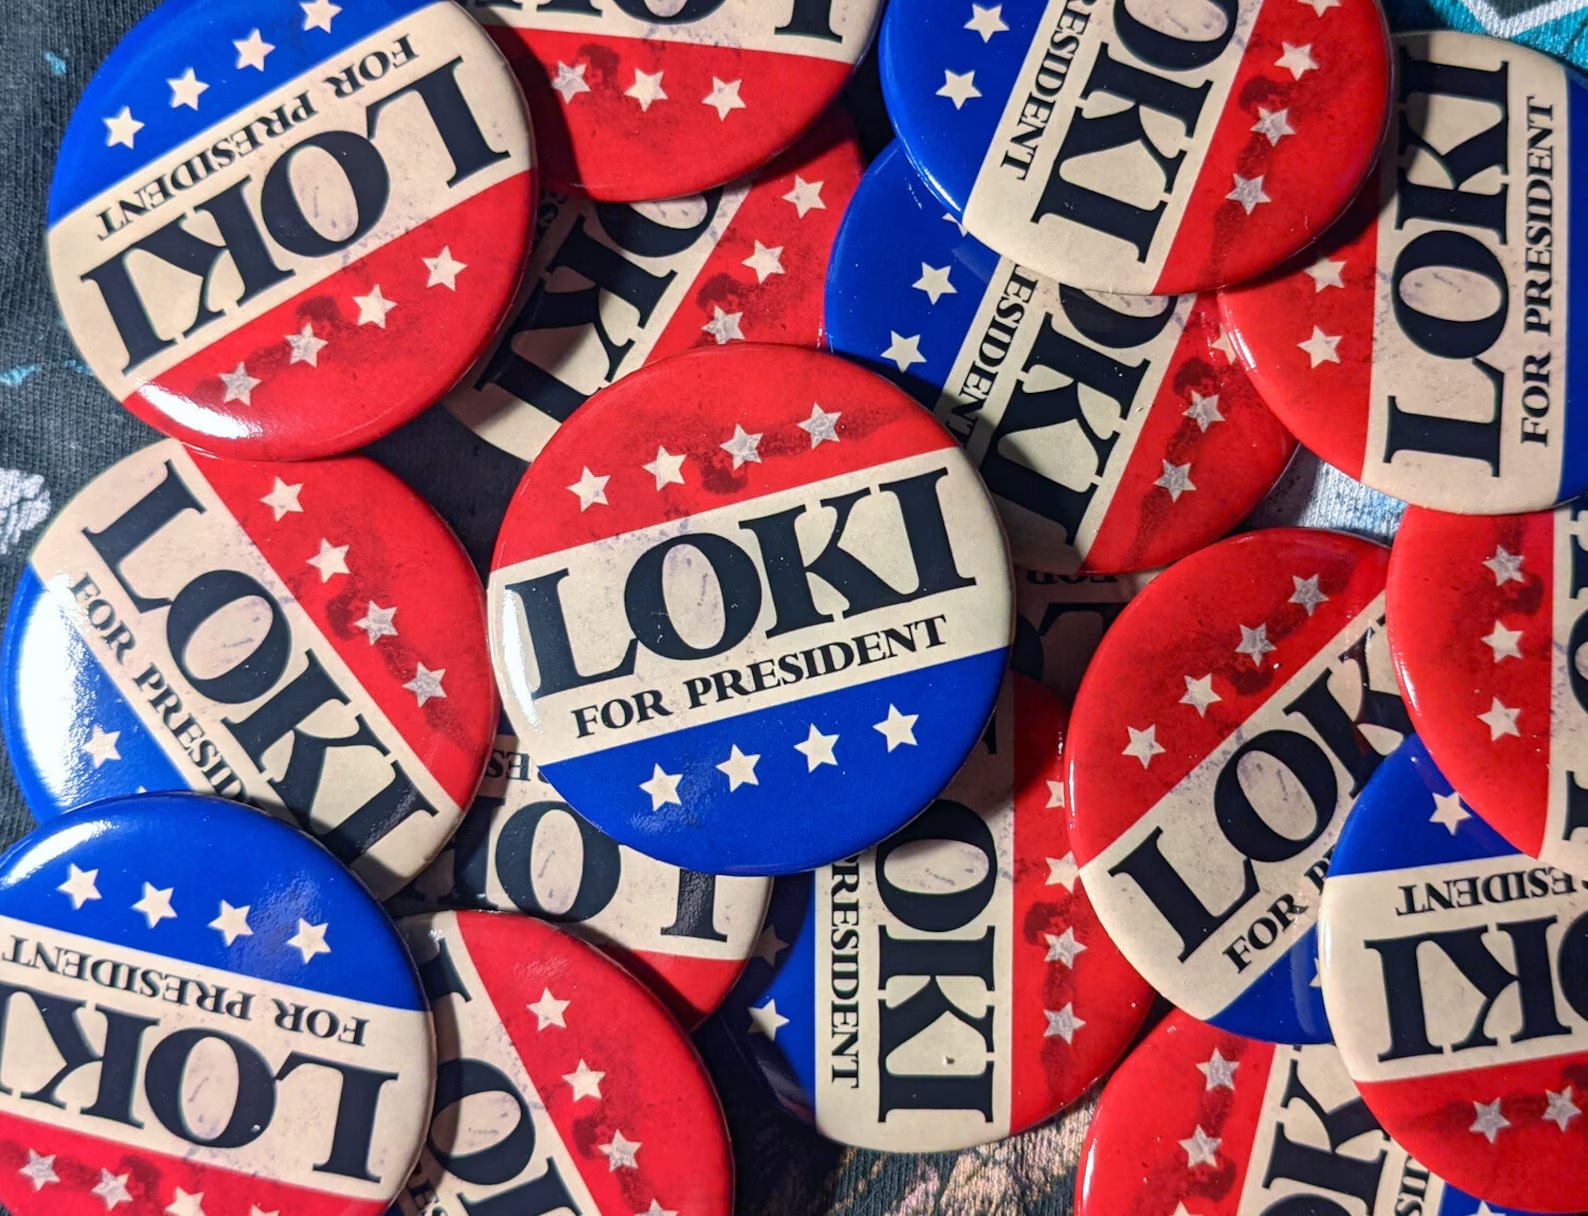 A pile of red, white, and blue campaign buttons that say "Loki for President"